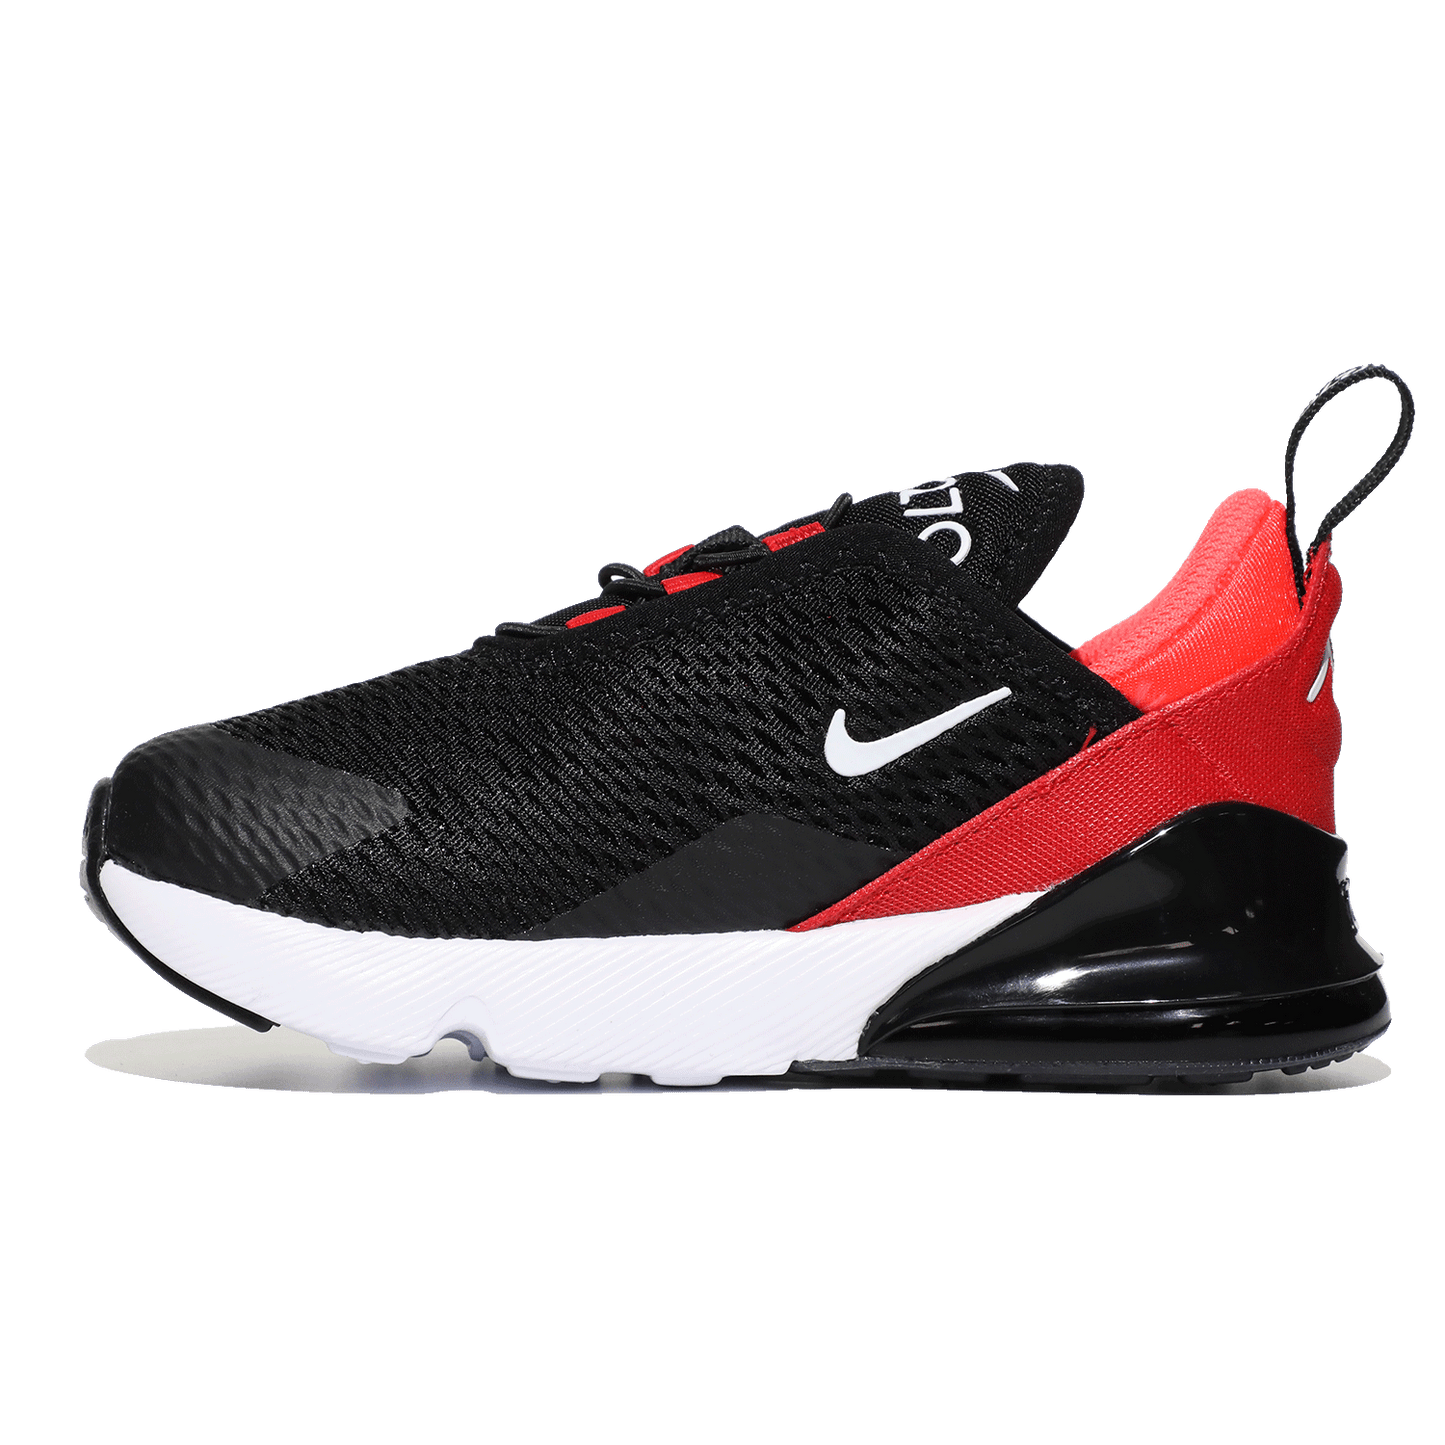 Image 6 of Air Max 270 (Infant/Toddler)